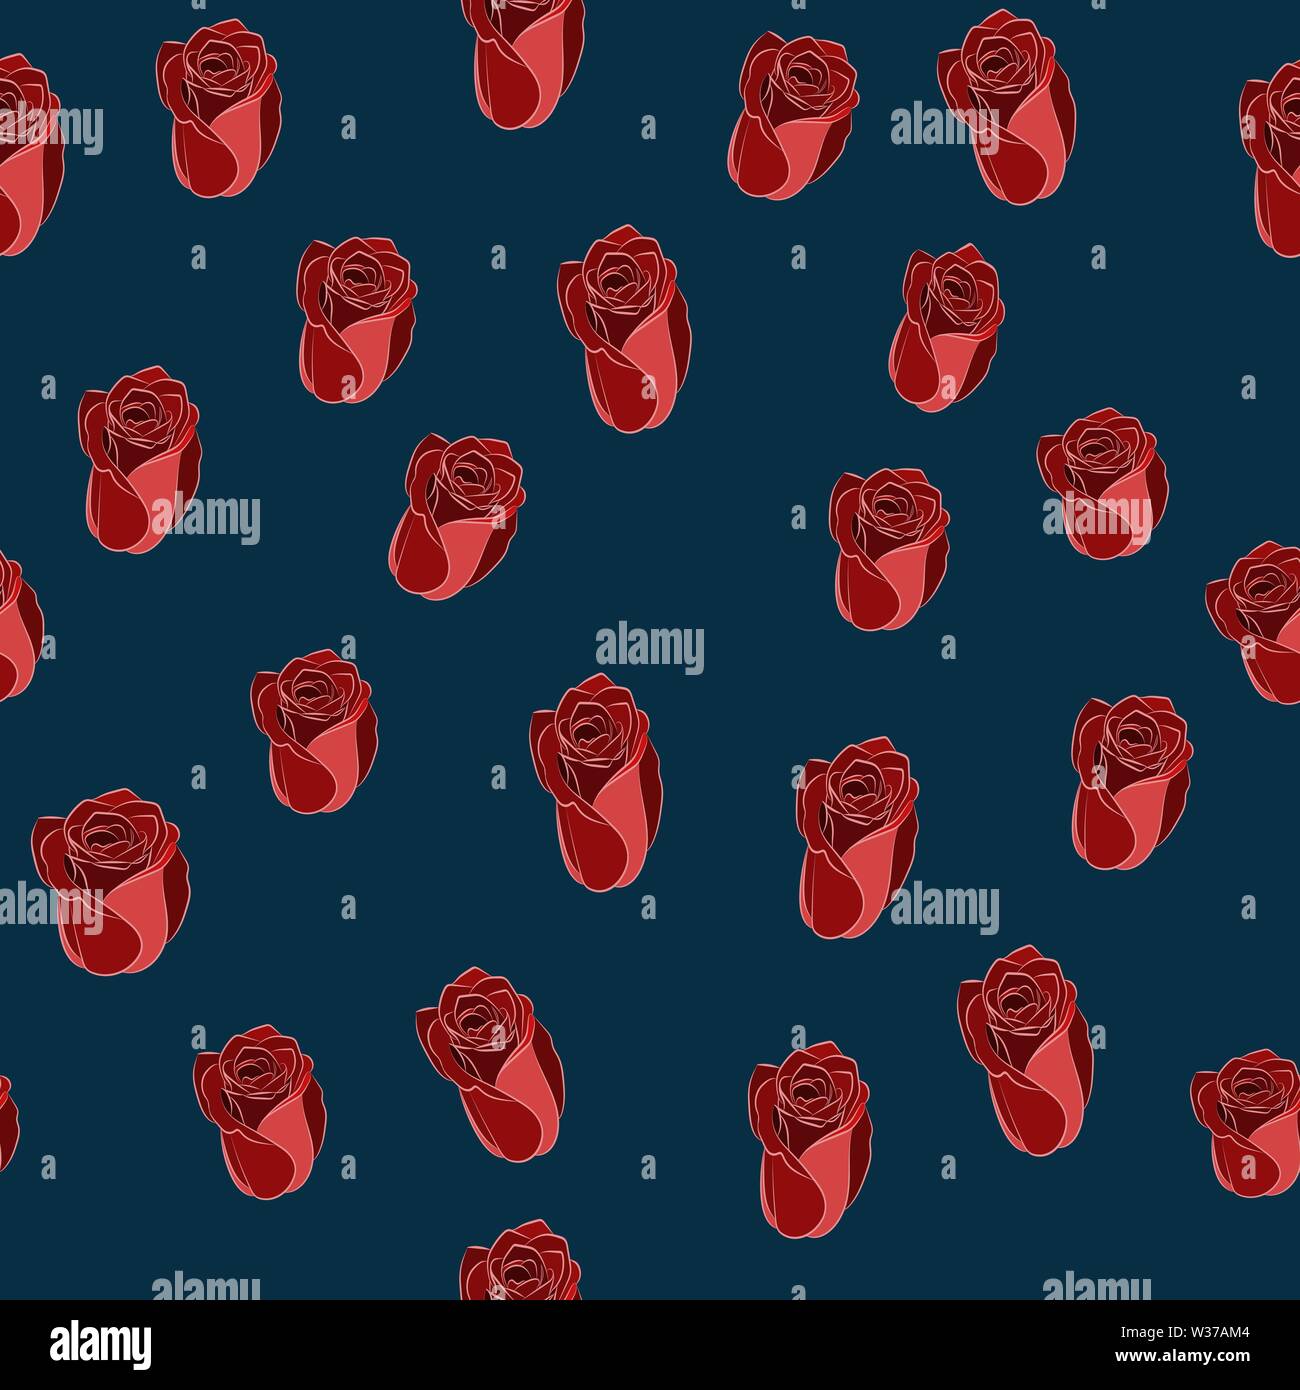 Vector seamless pattern with scarlet and red rose button on a dark-blue background. Stock Vector